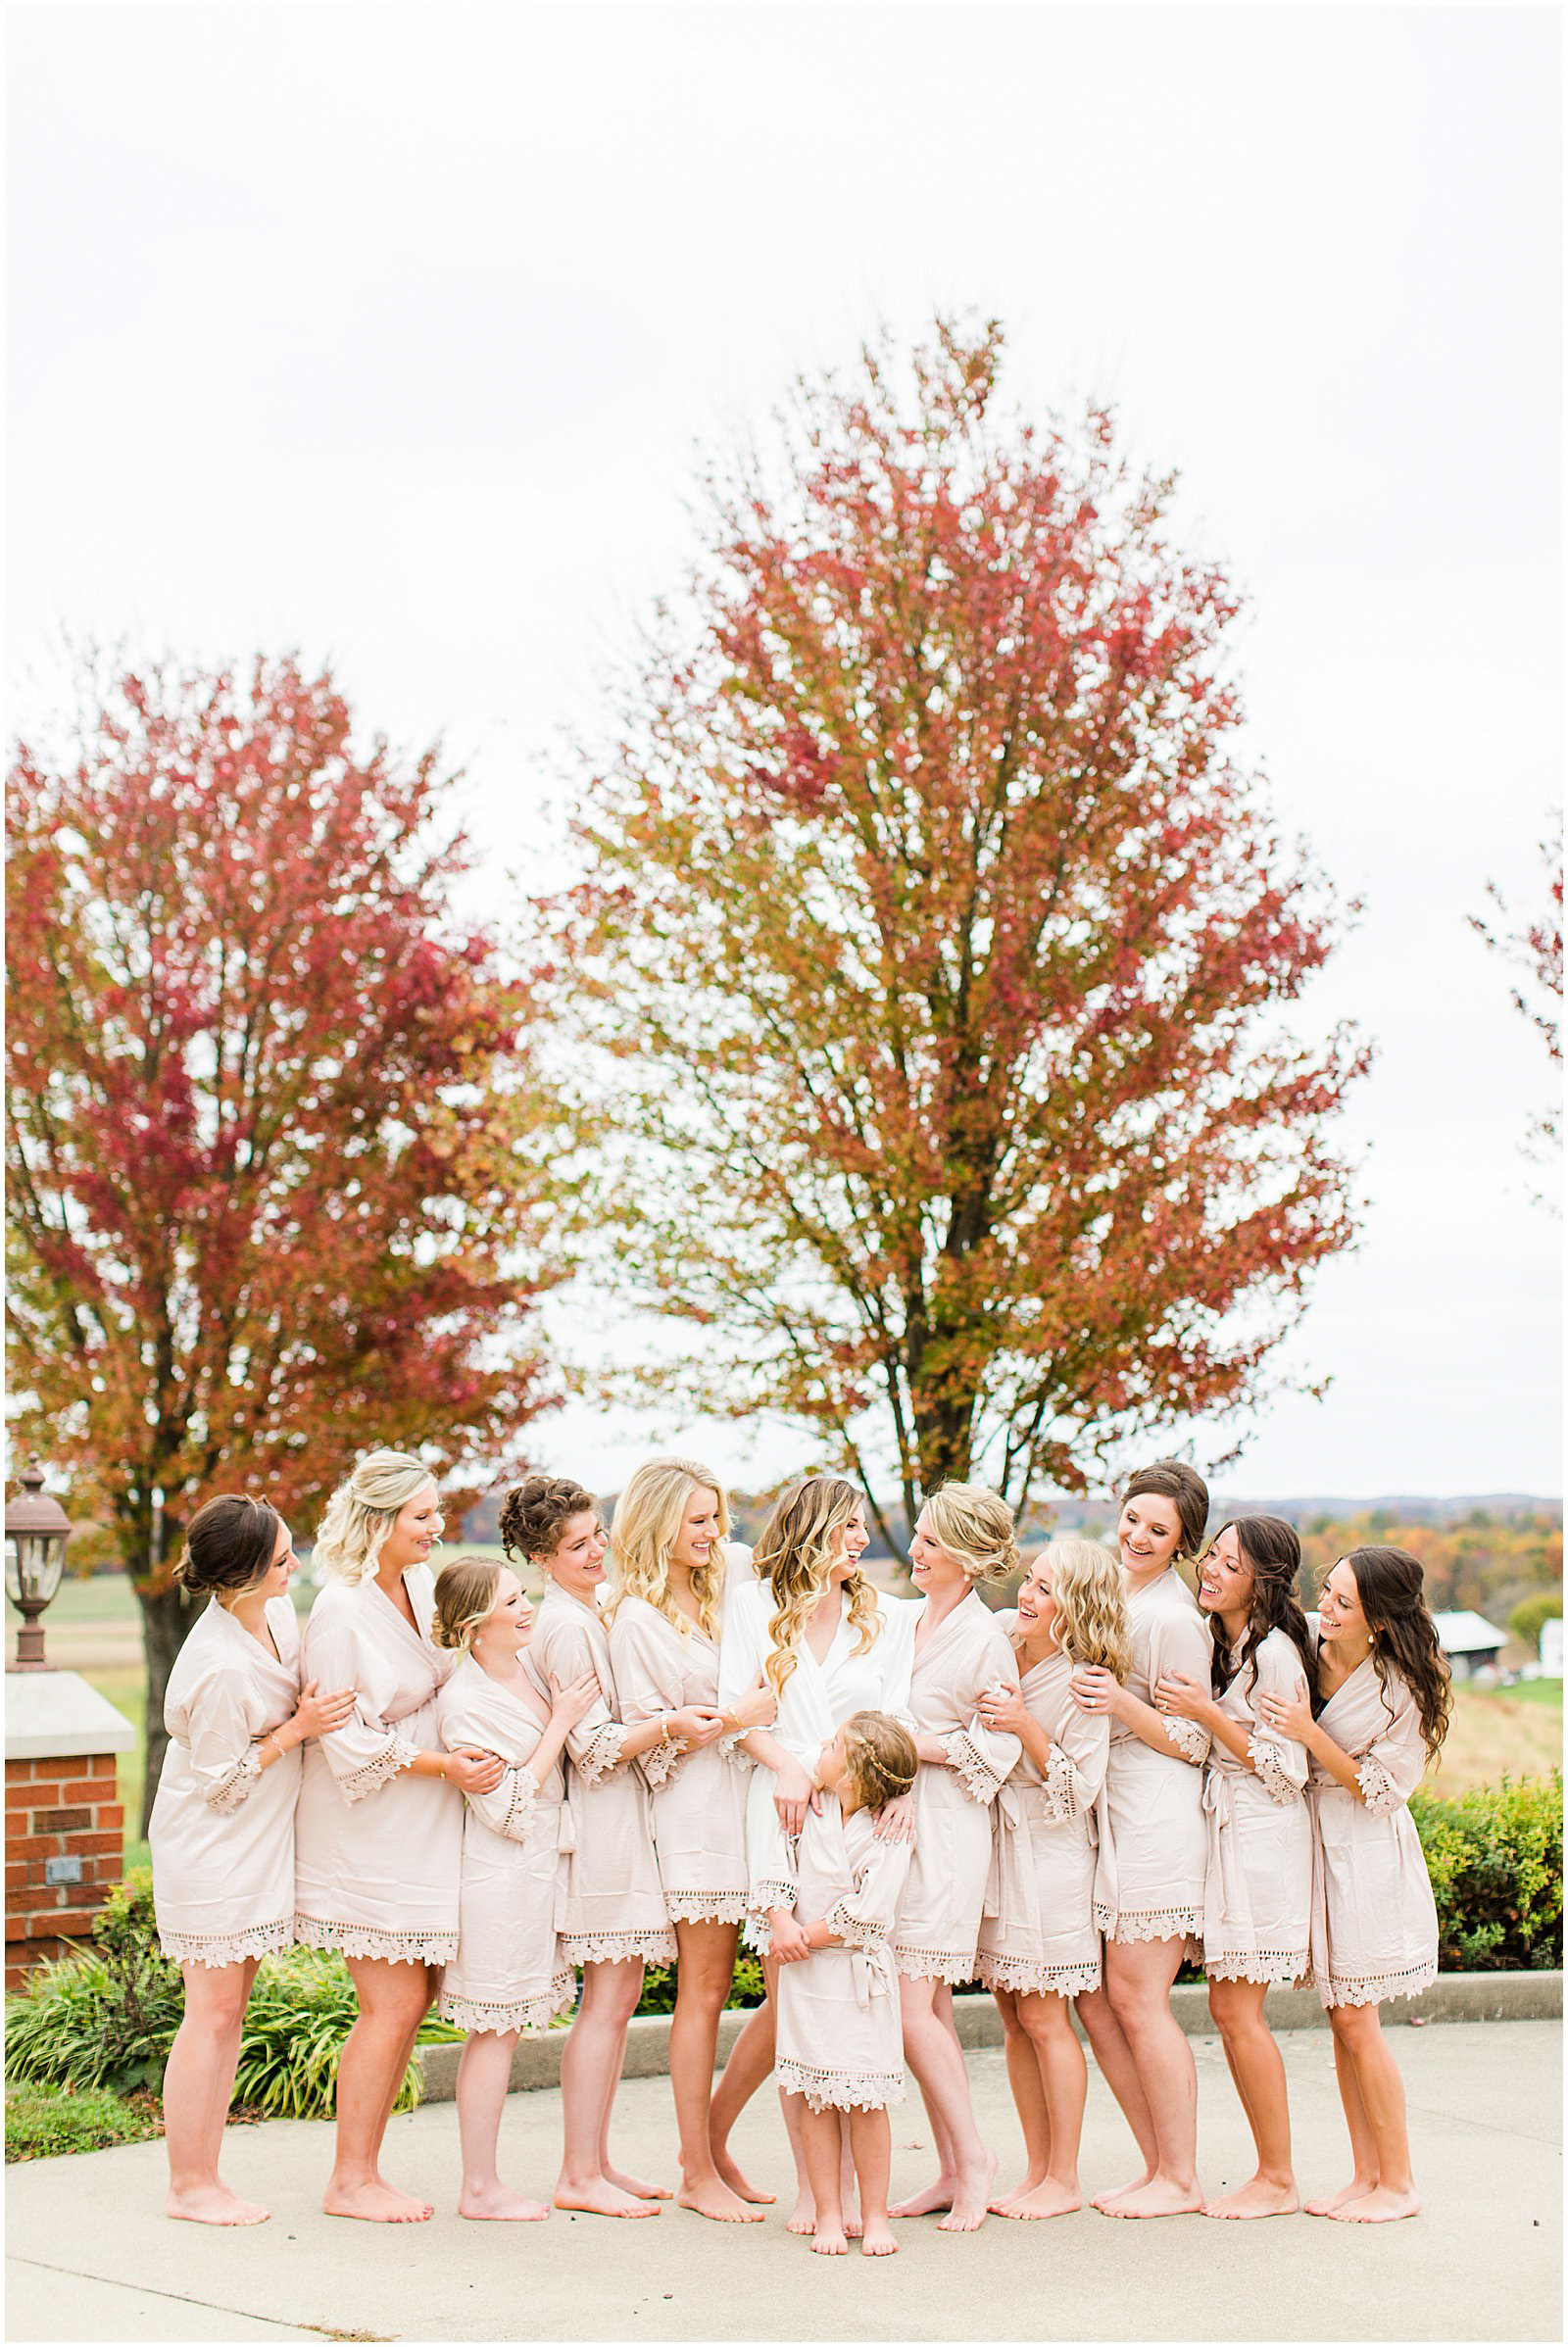 A Romantic Fall Wedding in Ferdinand, IN | Tori and Kyle | Bret and Brandie Photography 0008.jpg